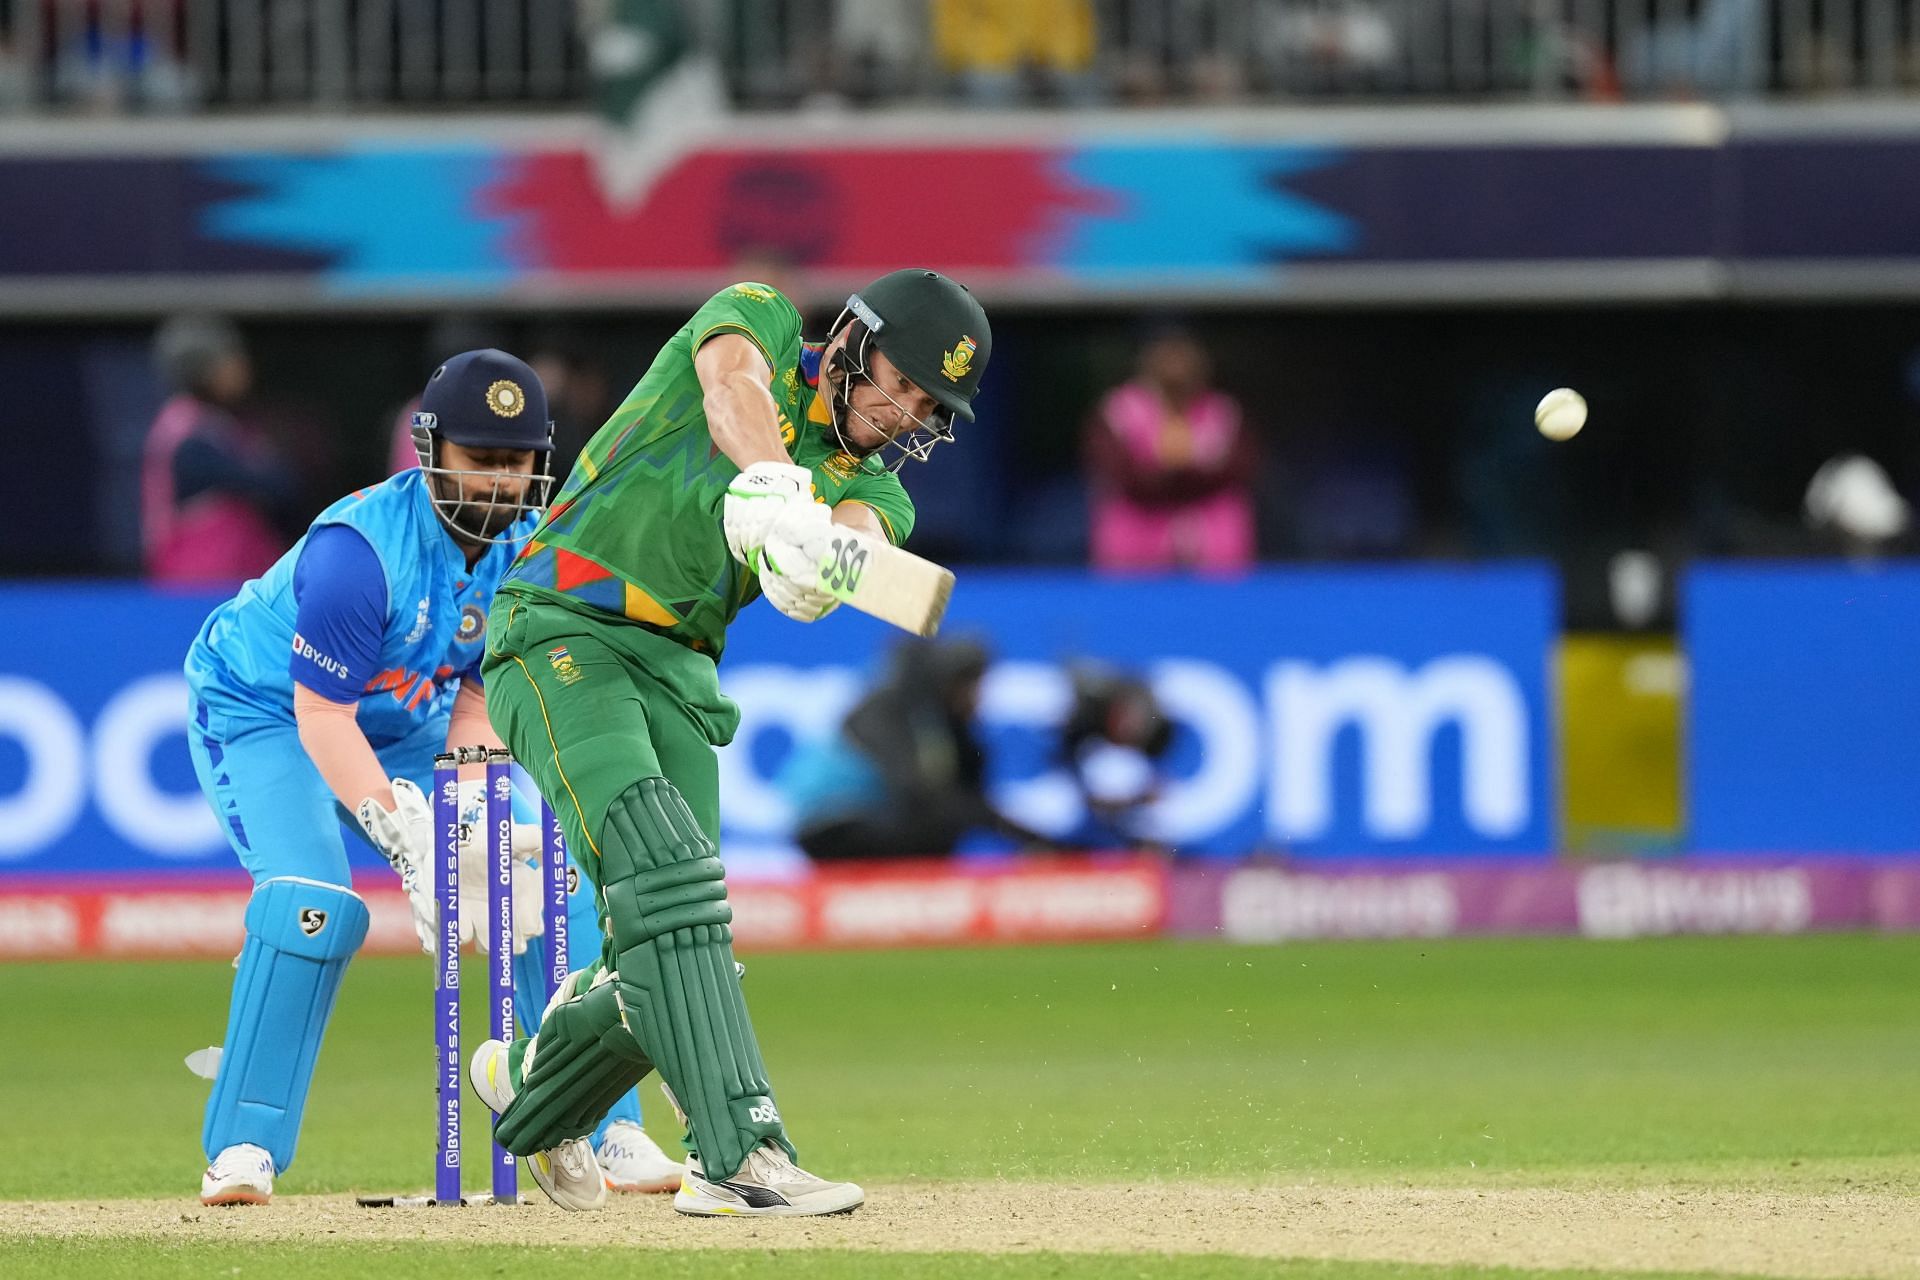 David Miller has played some cracking knocks against India in T20Is. (Pic: Getty Images)